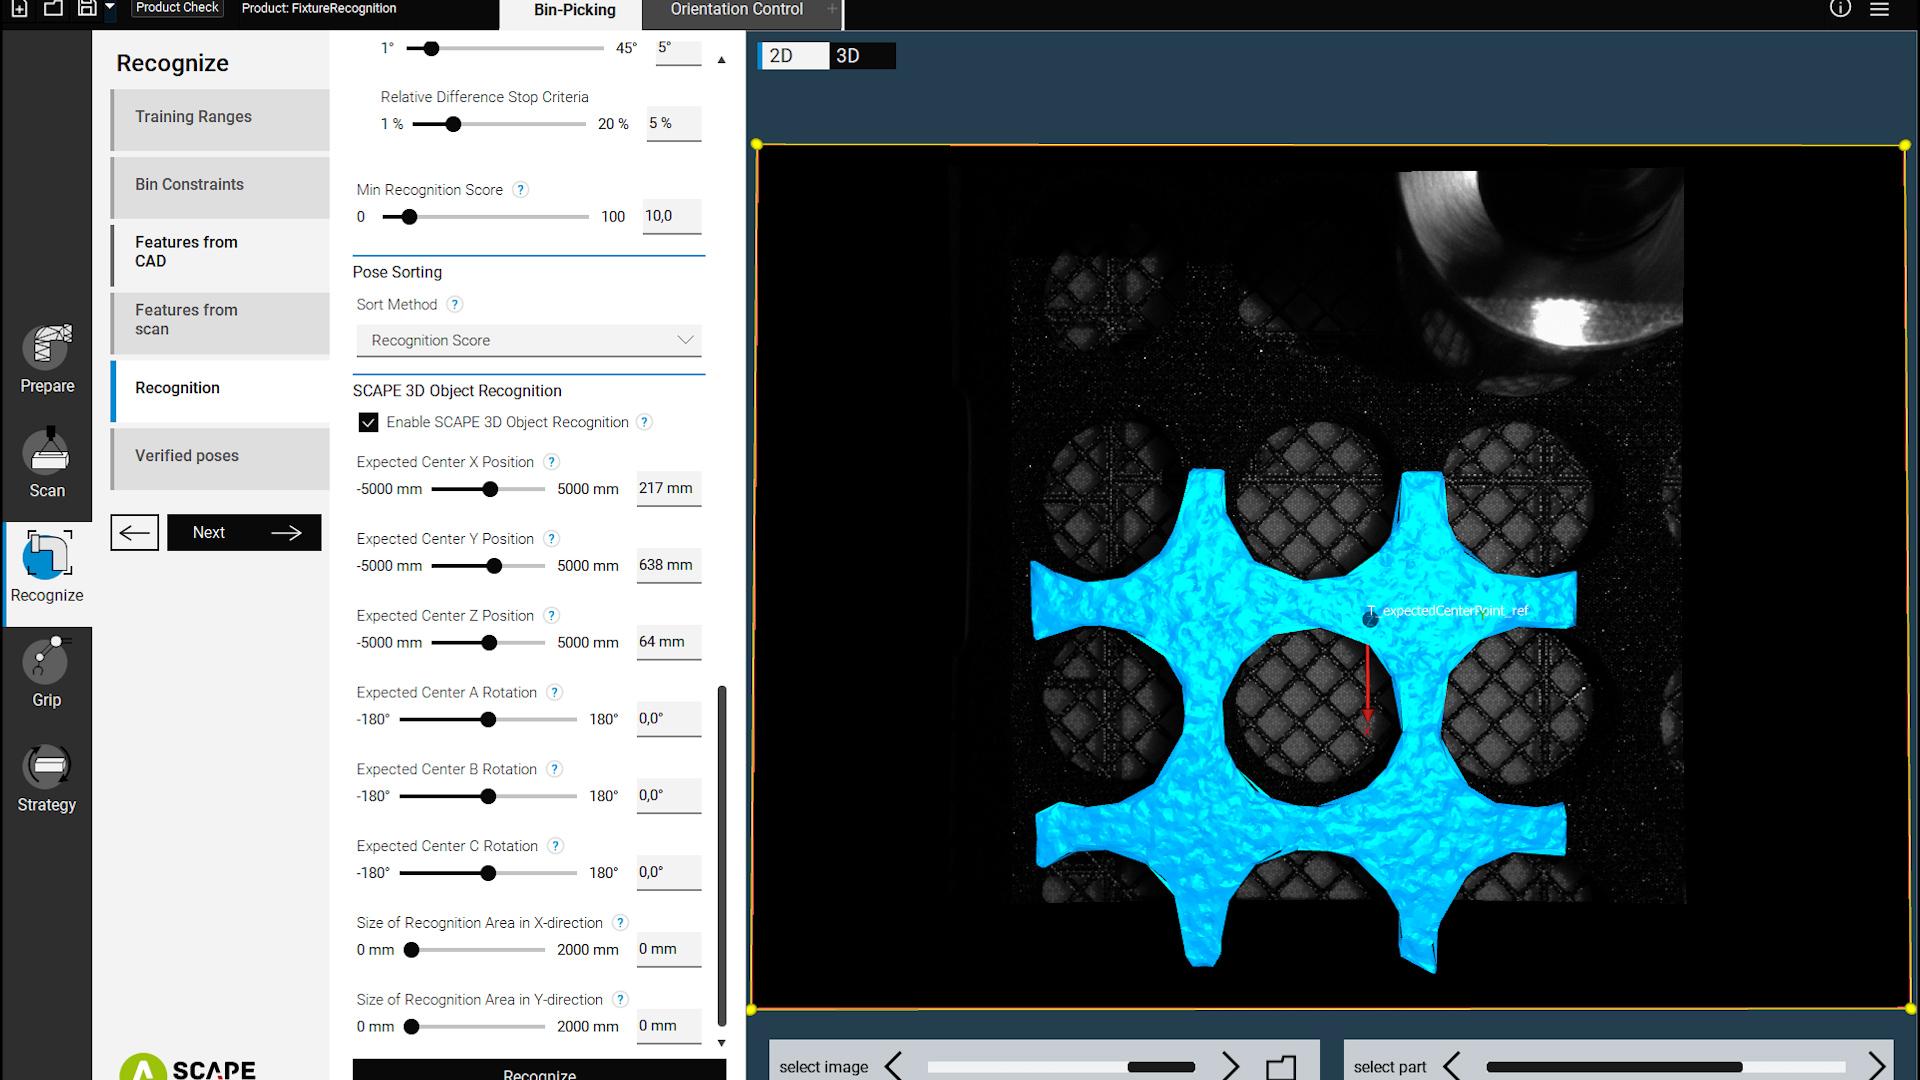 Print screen of SCAPE 3D Object Recognition software for object or fixture identification